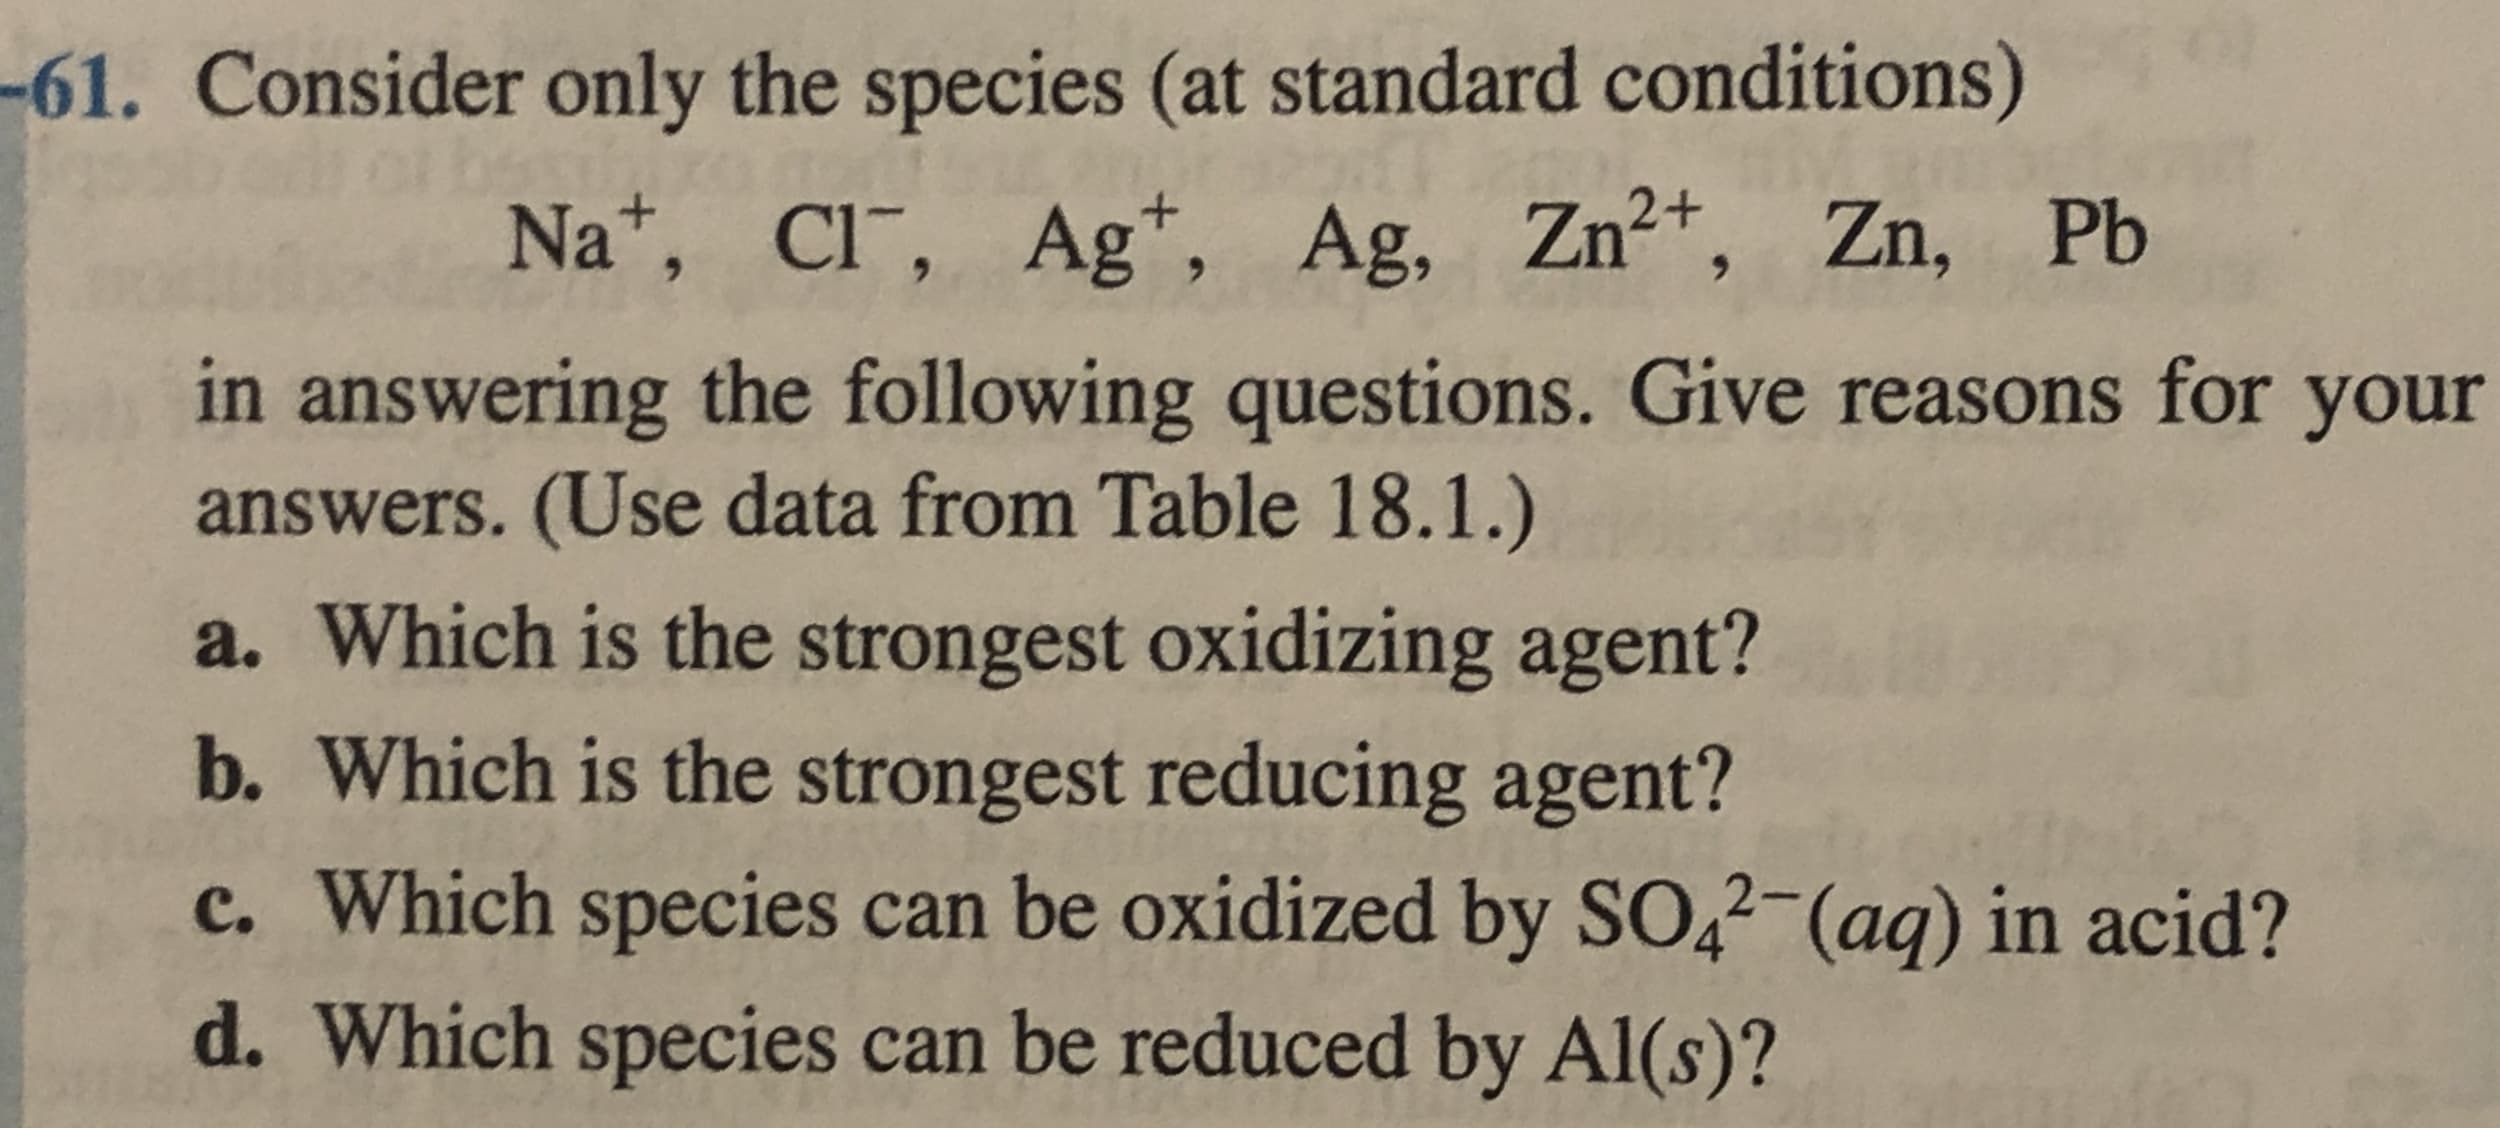 61. Consider only the species (at standard conditions)
Na*, Cl¯, Ag*, Ag, Zn+, Zn, Pb
in answering the following questions. Give reasons for your
answers. (Use data from Table 18.1.)
a. Which is the strongest oxidizing agent?
b. Which is the strongest reducing agent?
c. Which species can be oxidized by SO,2-(aq) in acid?
d Which snecies can he roduao
